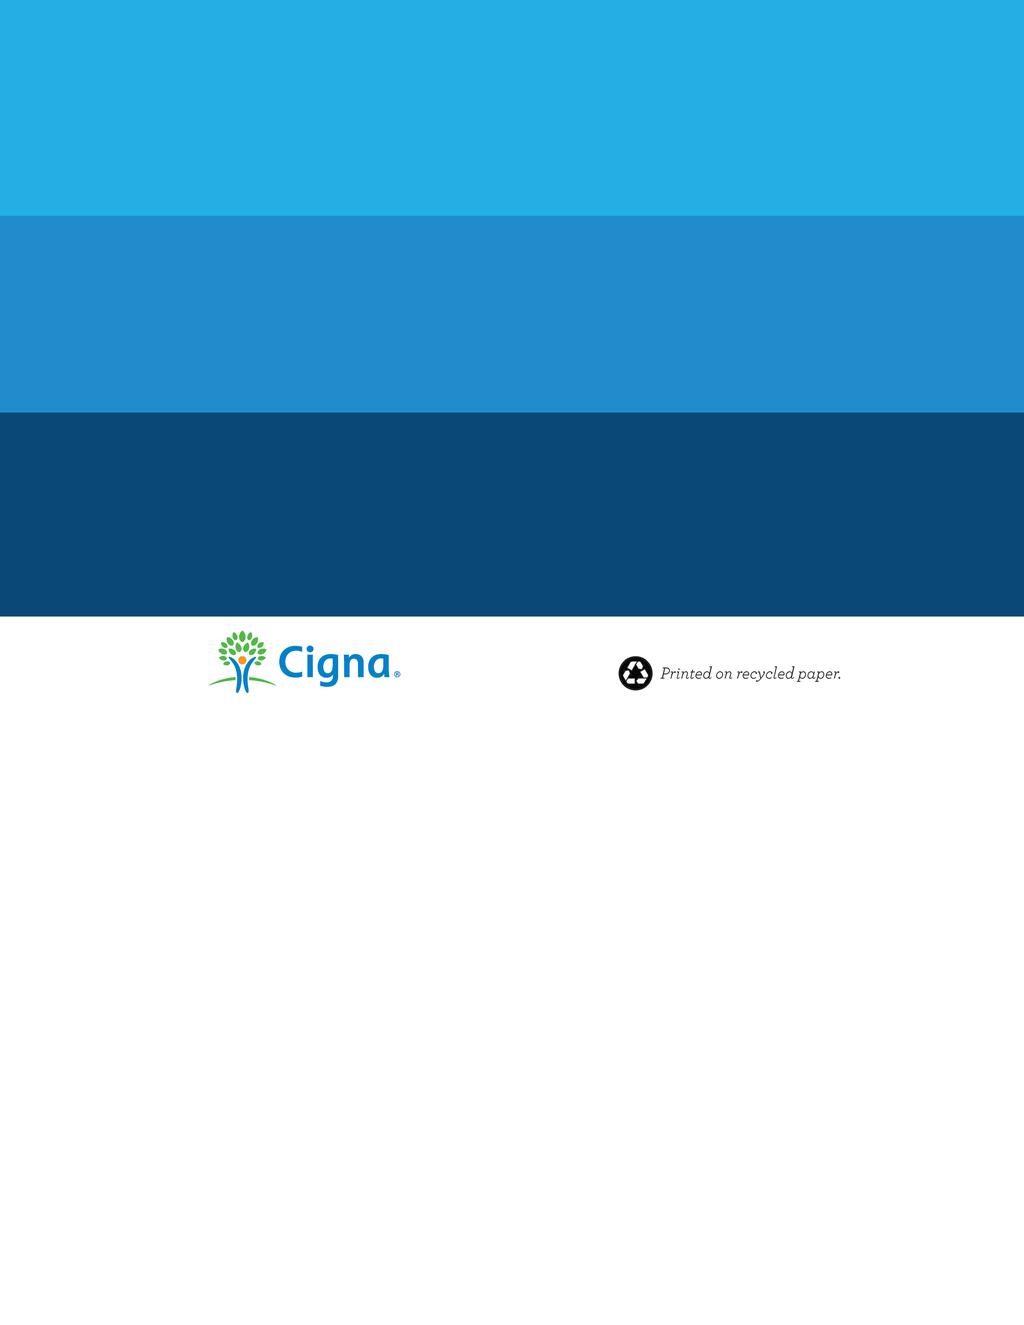 All Cigna products services are provided exclusively by or through operating subsidiaries of Cigna Corporation, including Cigna Health Life Insurance Company, Connecticut General Life Insurance